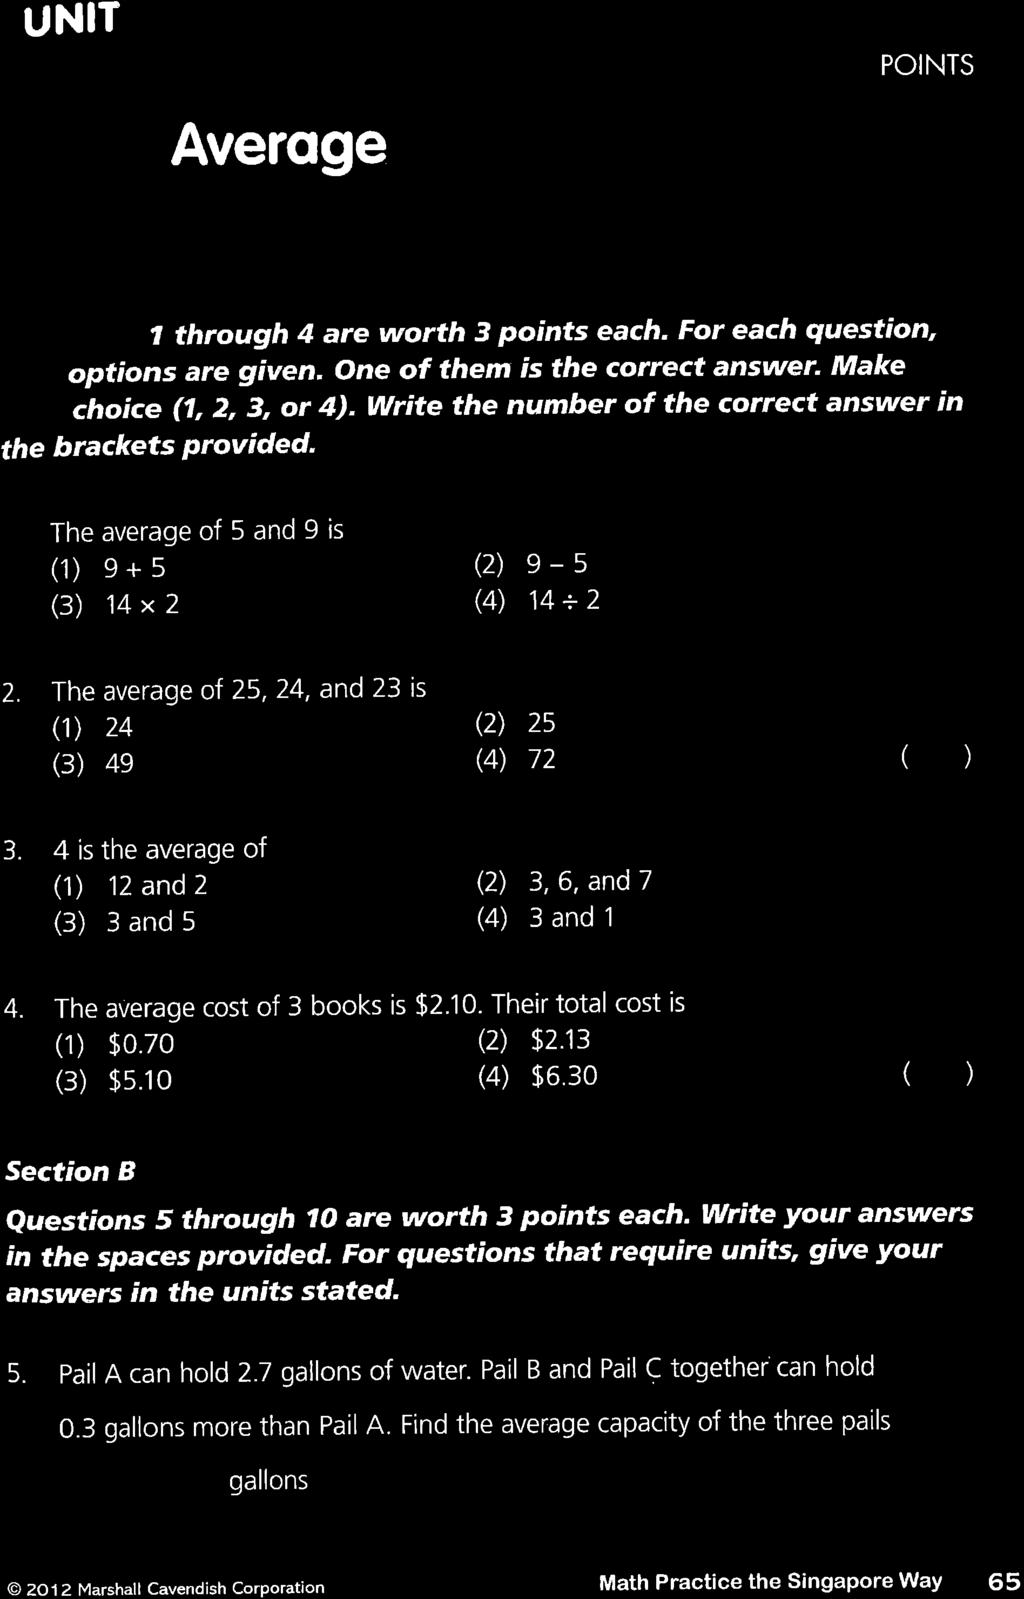 UNIT Averoge POINTS 7 through 4 are worth 3 points each. For each question' options are given. One of them is the correct answer. Make choice (7, 2, 3, or 4).